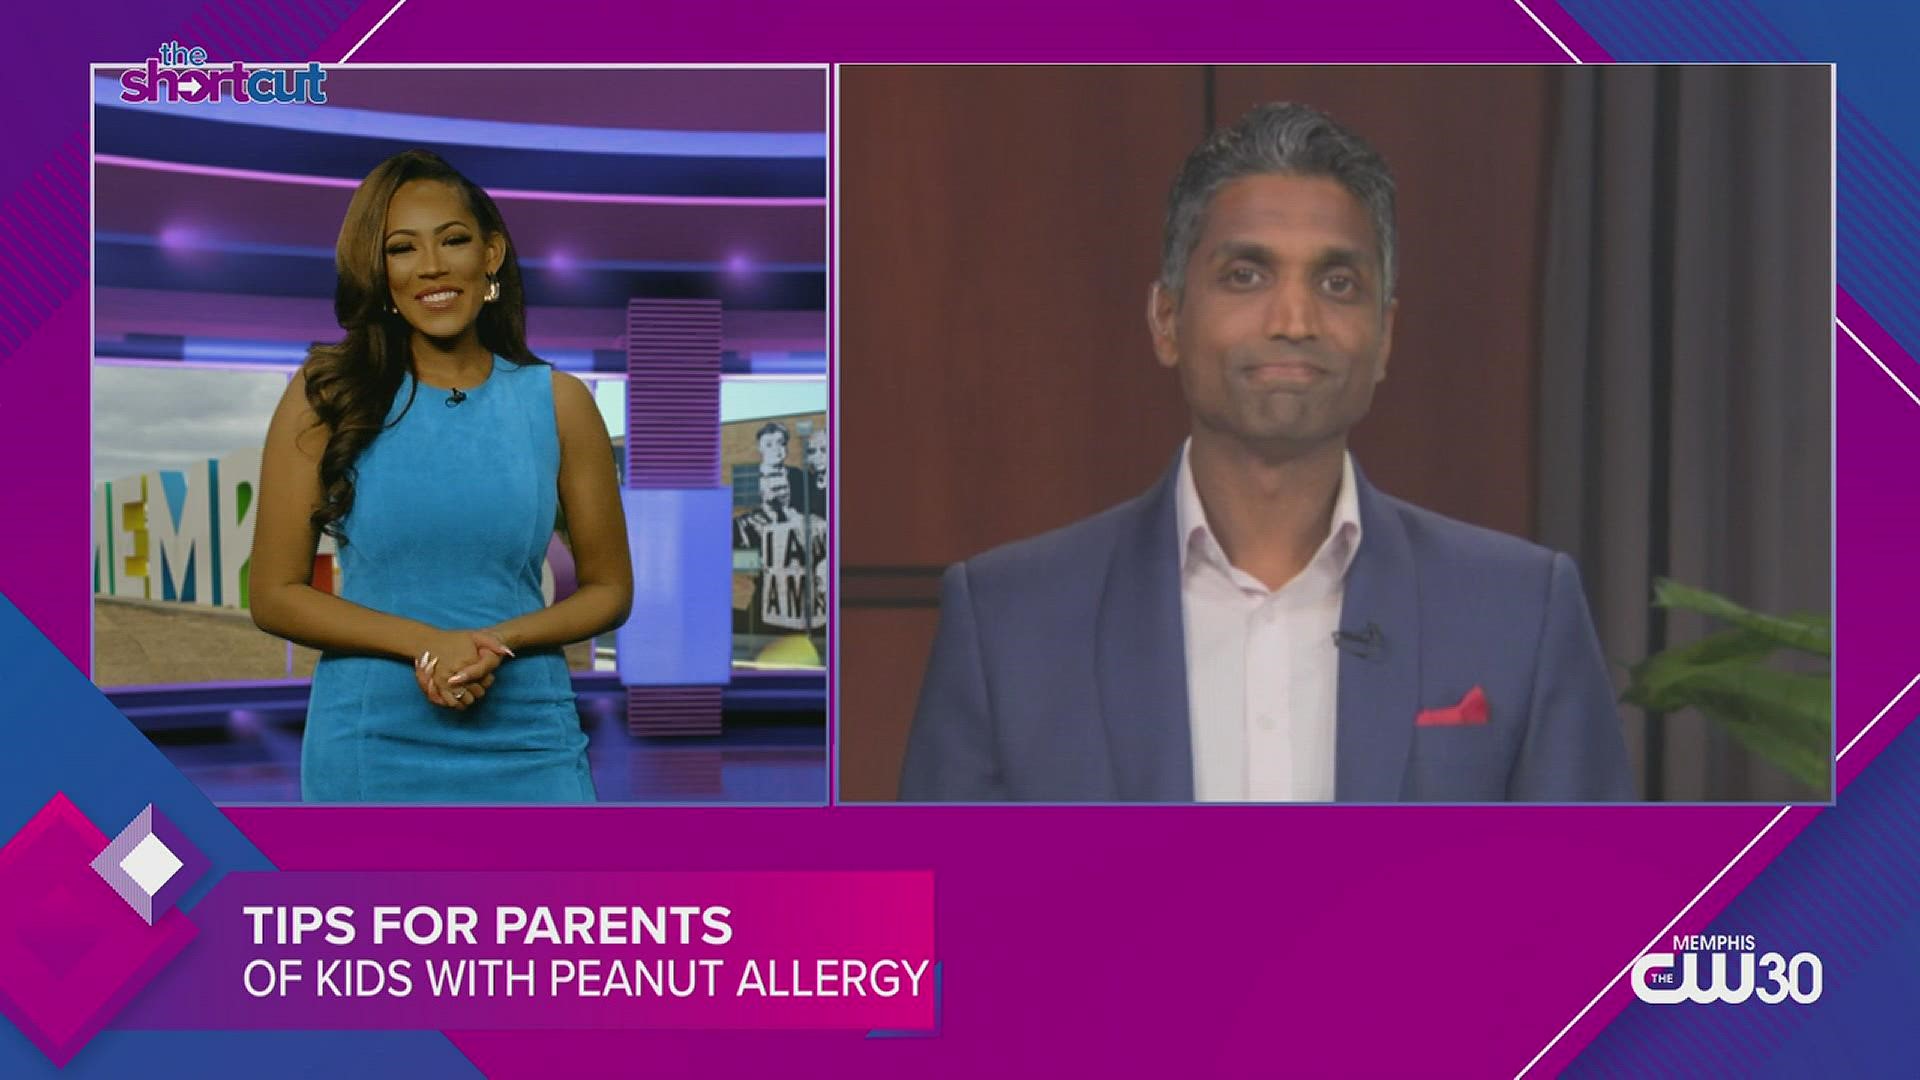 Did you know that about 1.3 million young Americans suffer from peanut allergies? Join Sydney Neely and Dr. Ananth Thyagarajan for tips on how to deal with them.